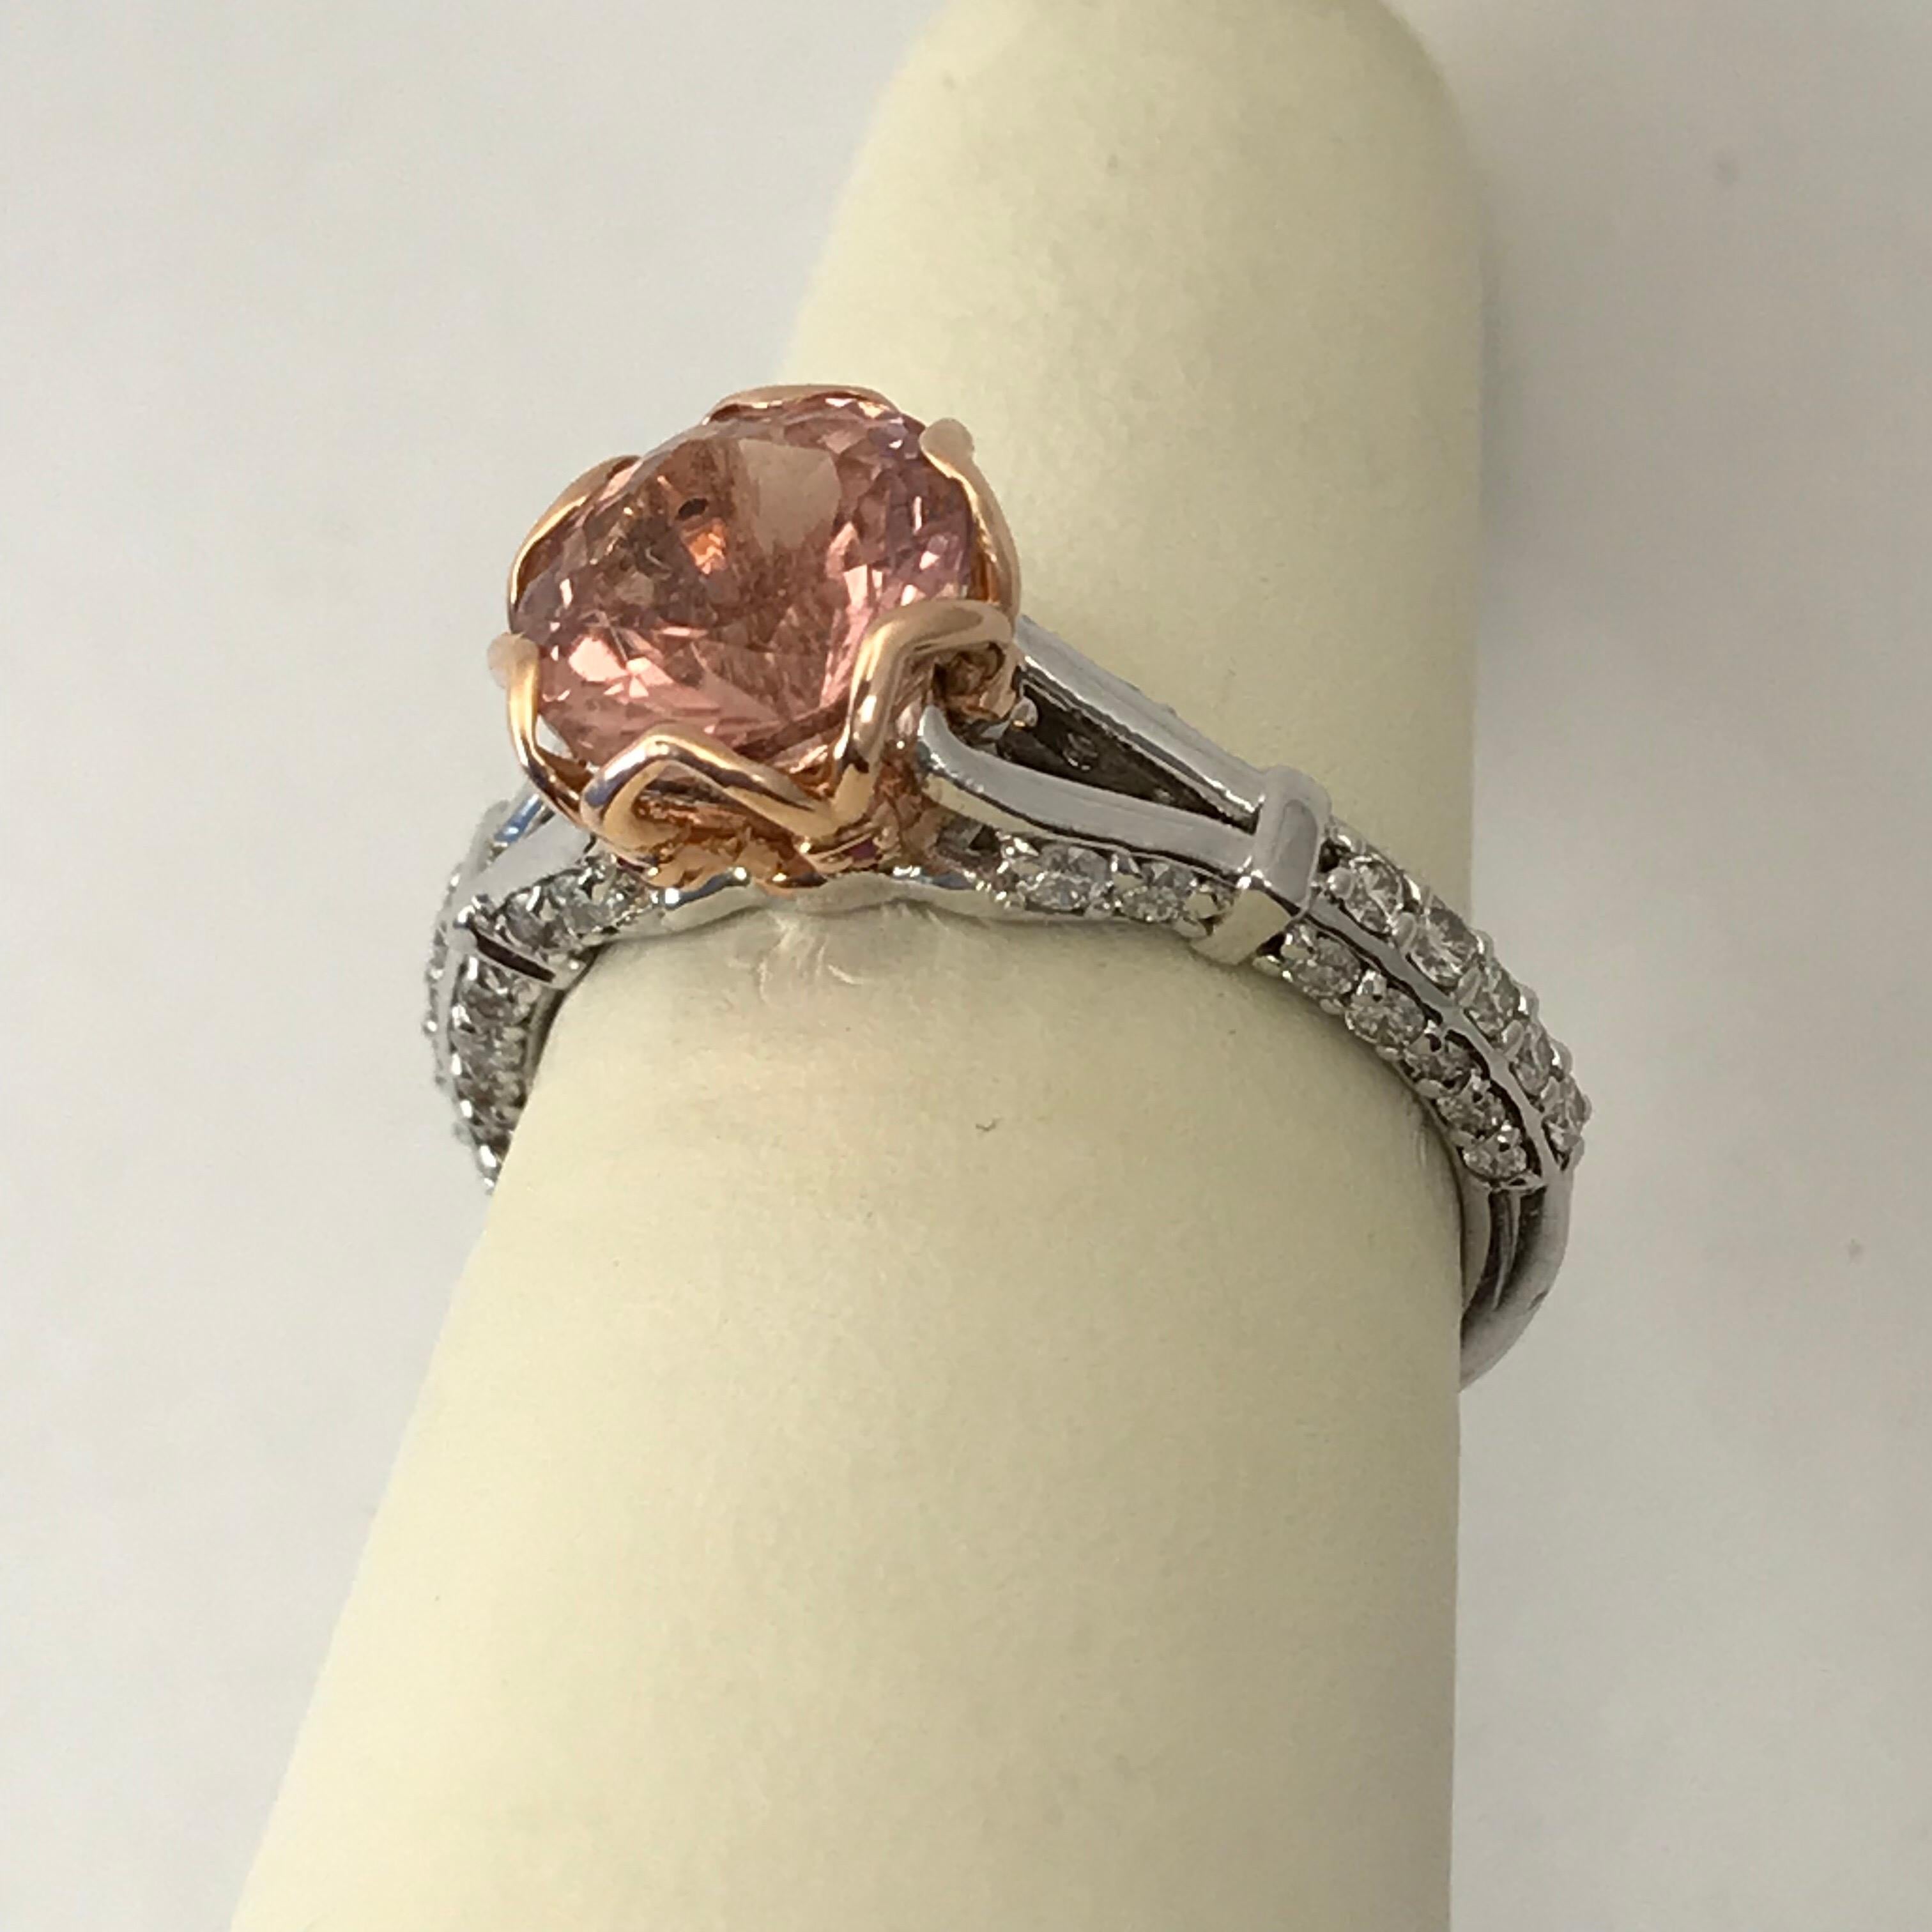 1.96 Carat Peach Tourmaline Set in 14 Karat White and Rose Gold Engagement Ring For Sale 1